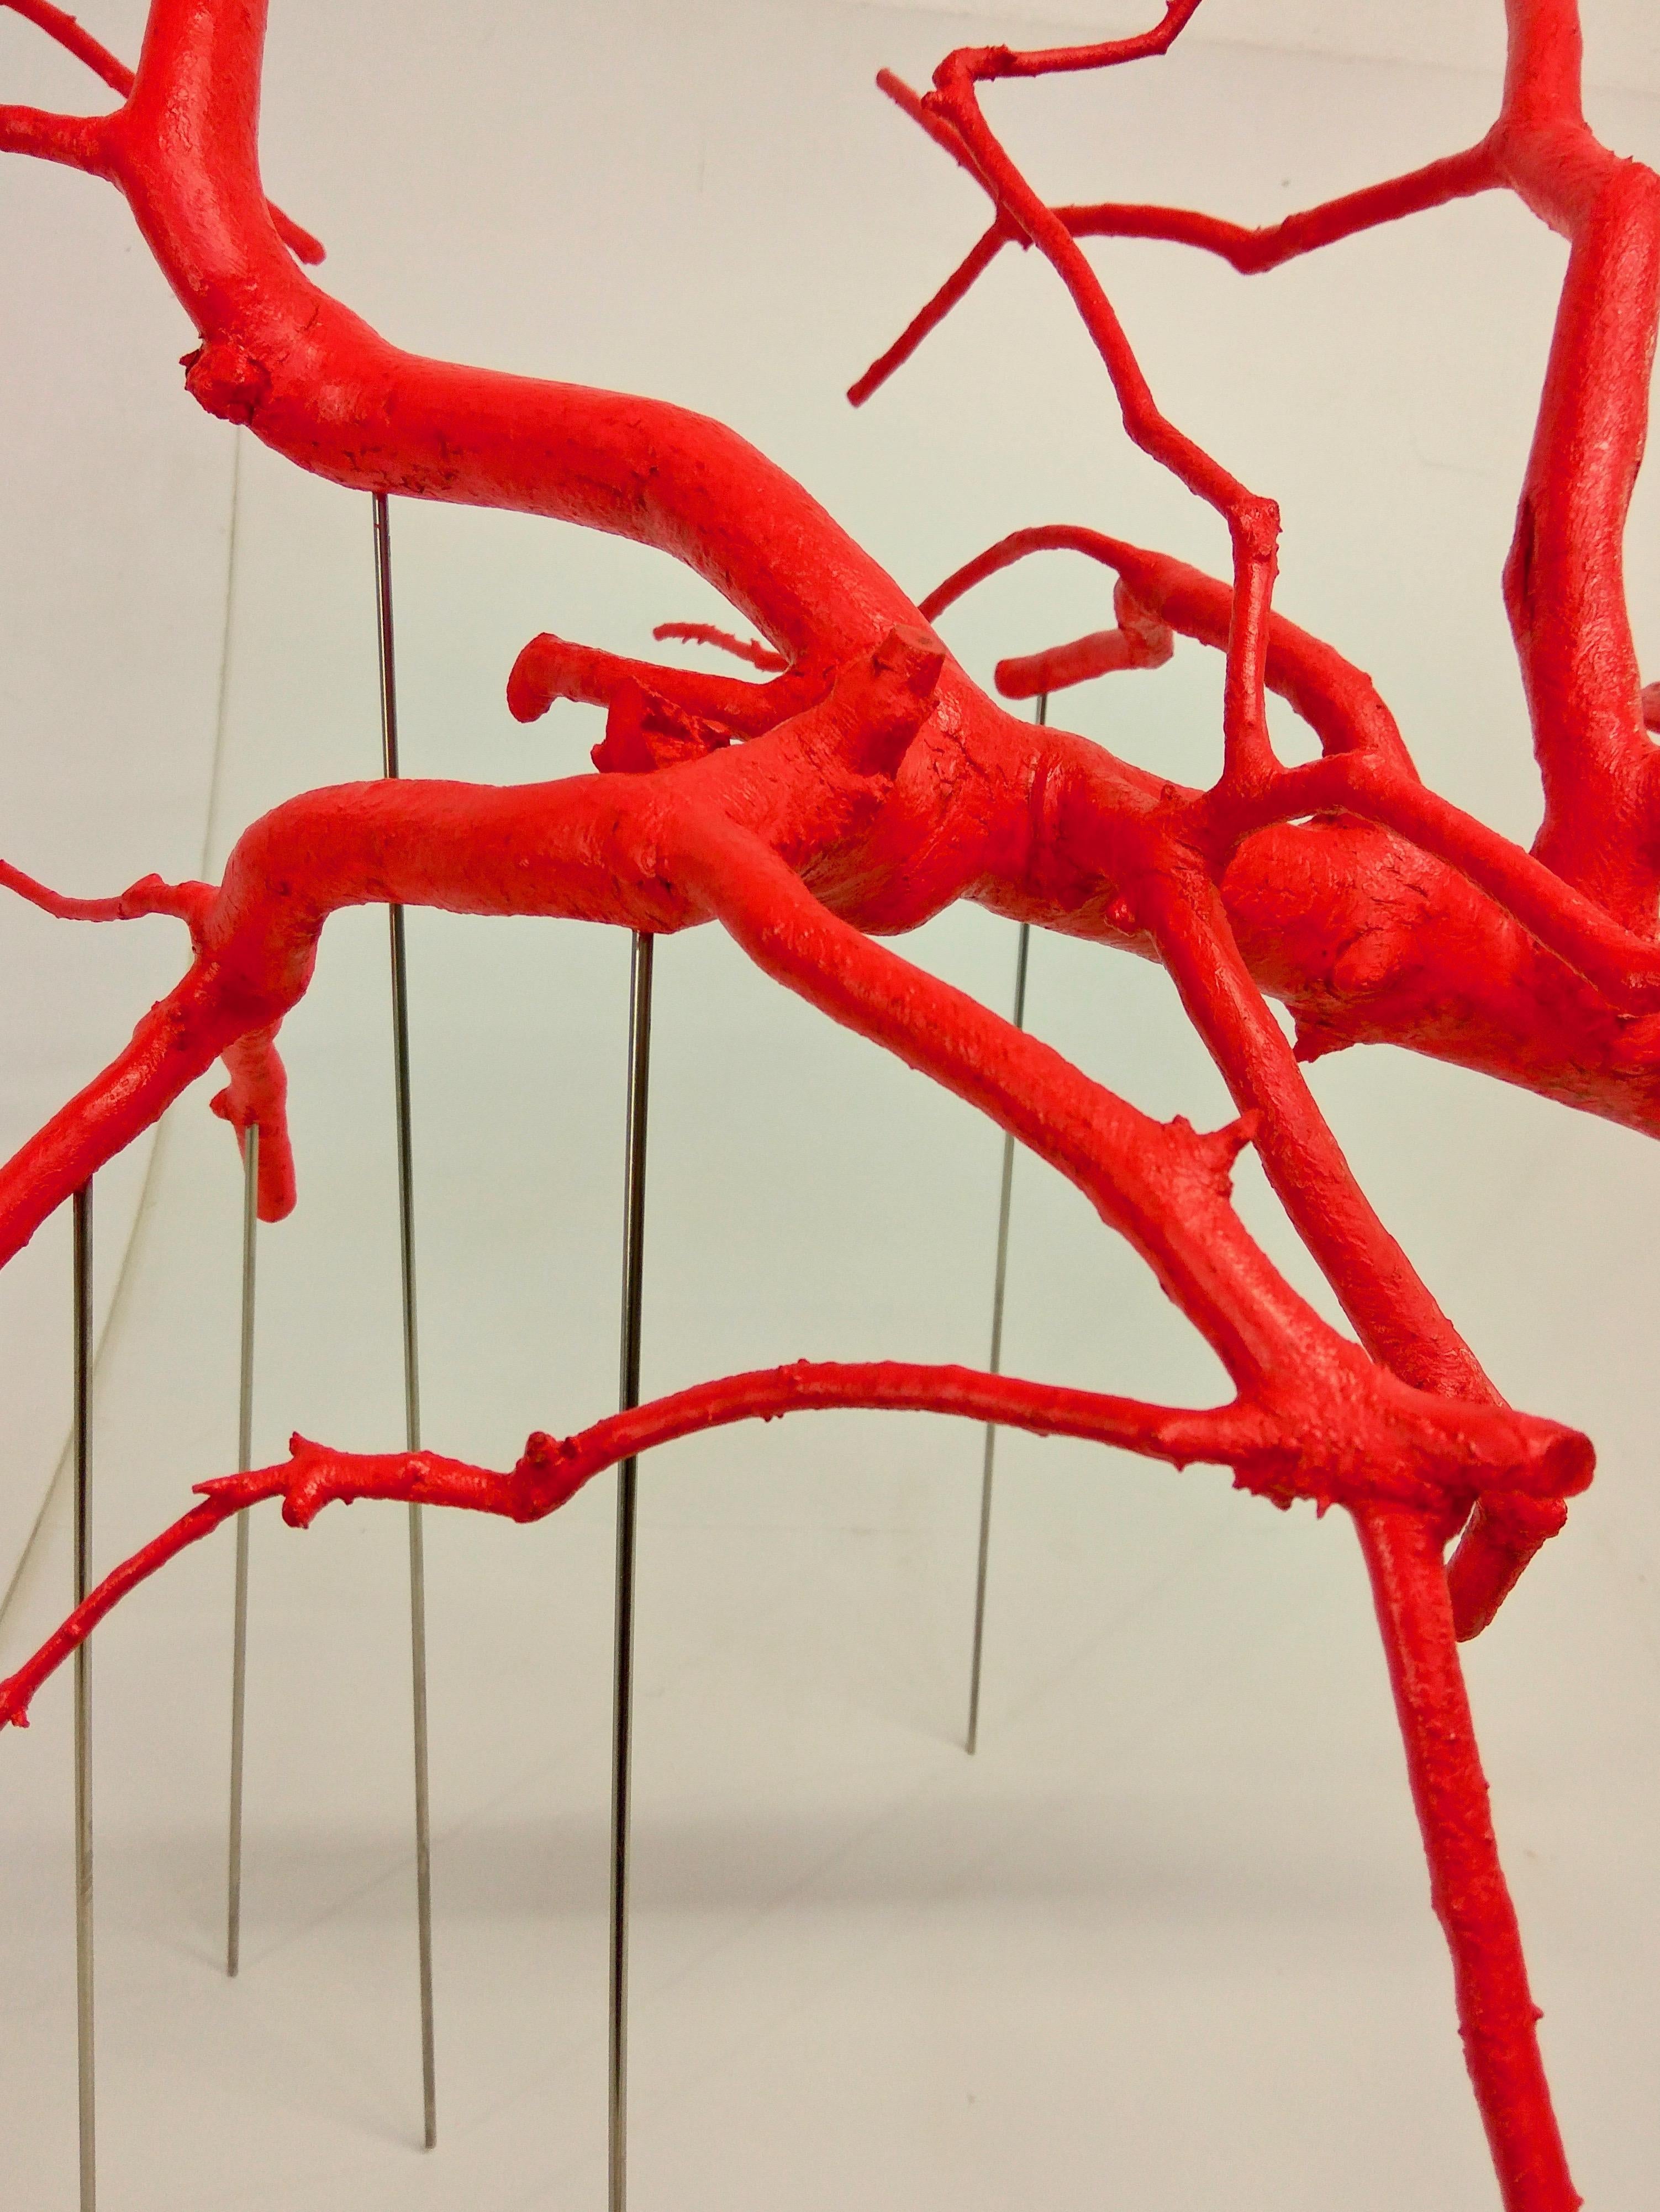 Hand-Crafted Handmade Red Rami Sospesi Sculpture by Le Meduse For Sale